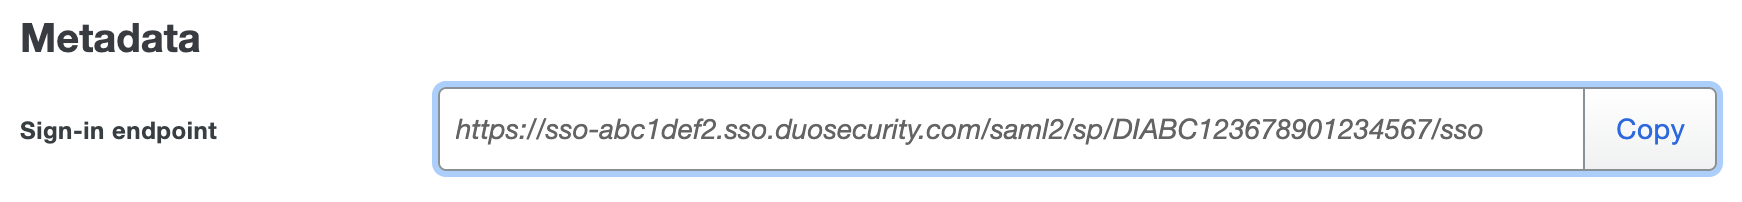 Duo Island Sign-in Endpoint URL